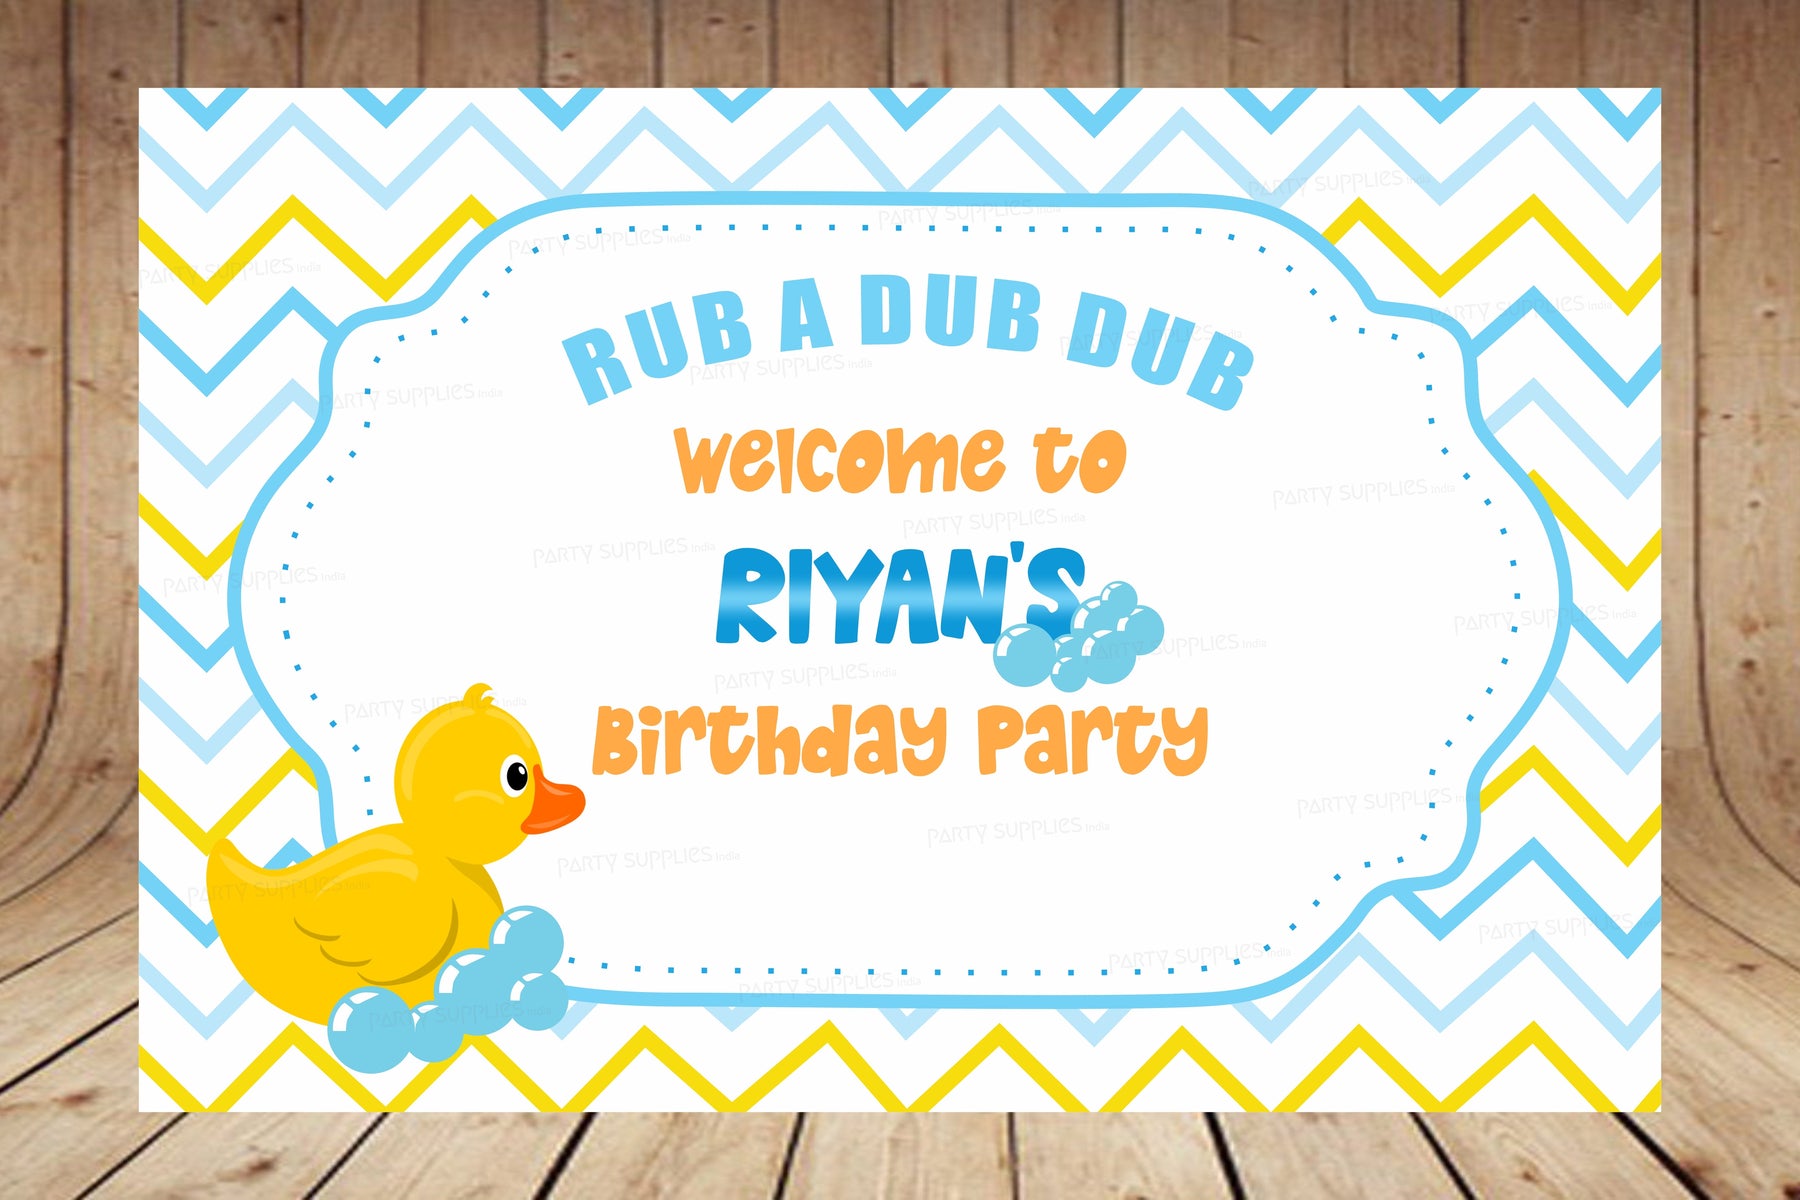 PSI Duck Theme Boy Personalized Welcome Board